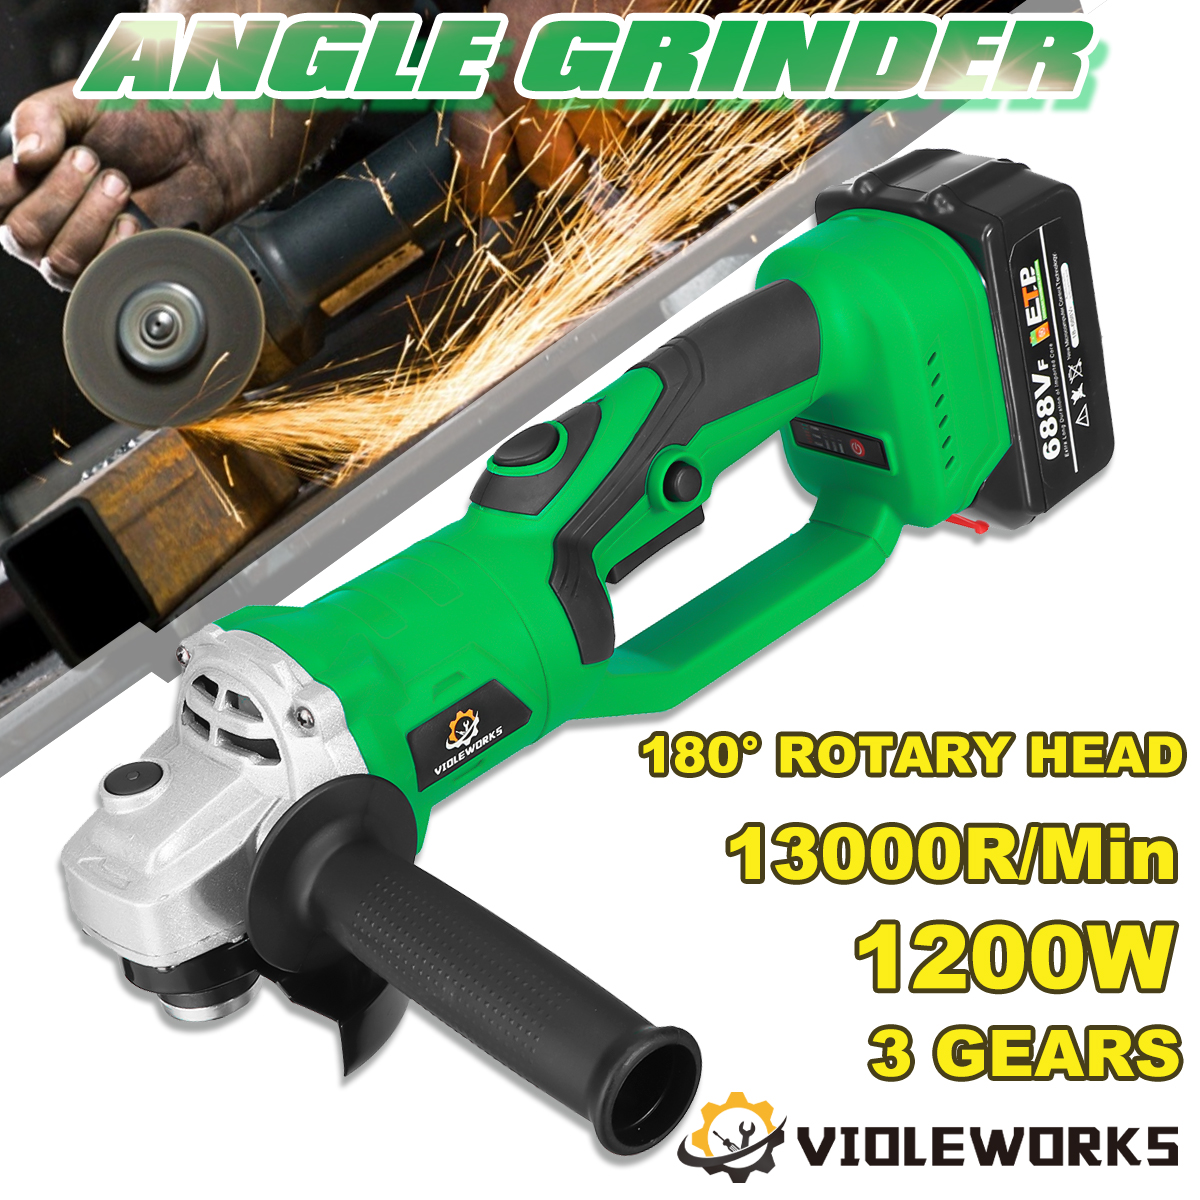 688VF-1200W-100mm-Brushless-Electric-Angle-Grinder-180deg-Rotation-3-Gears-Cutting-Grinding-Tool-Ind-1859330-1